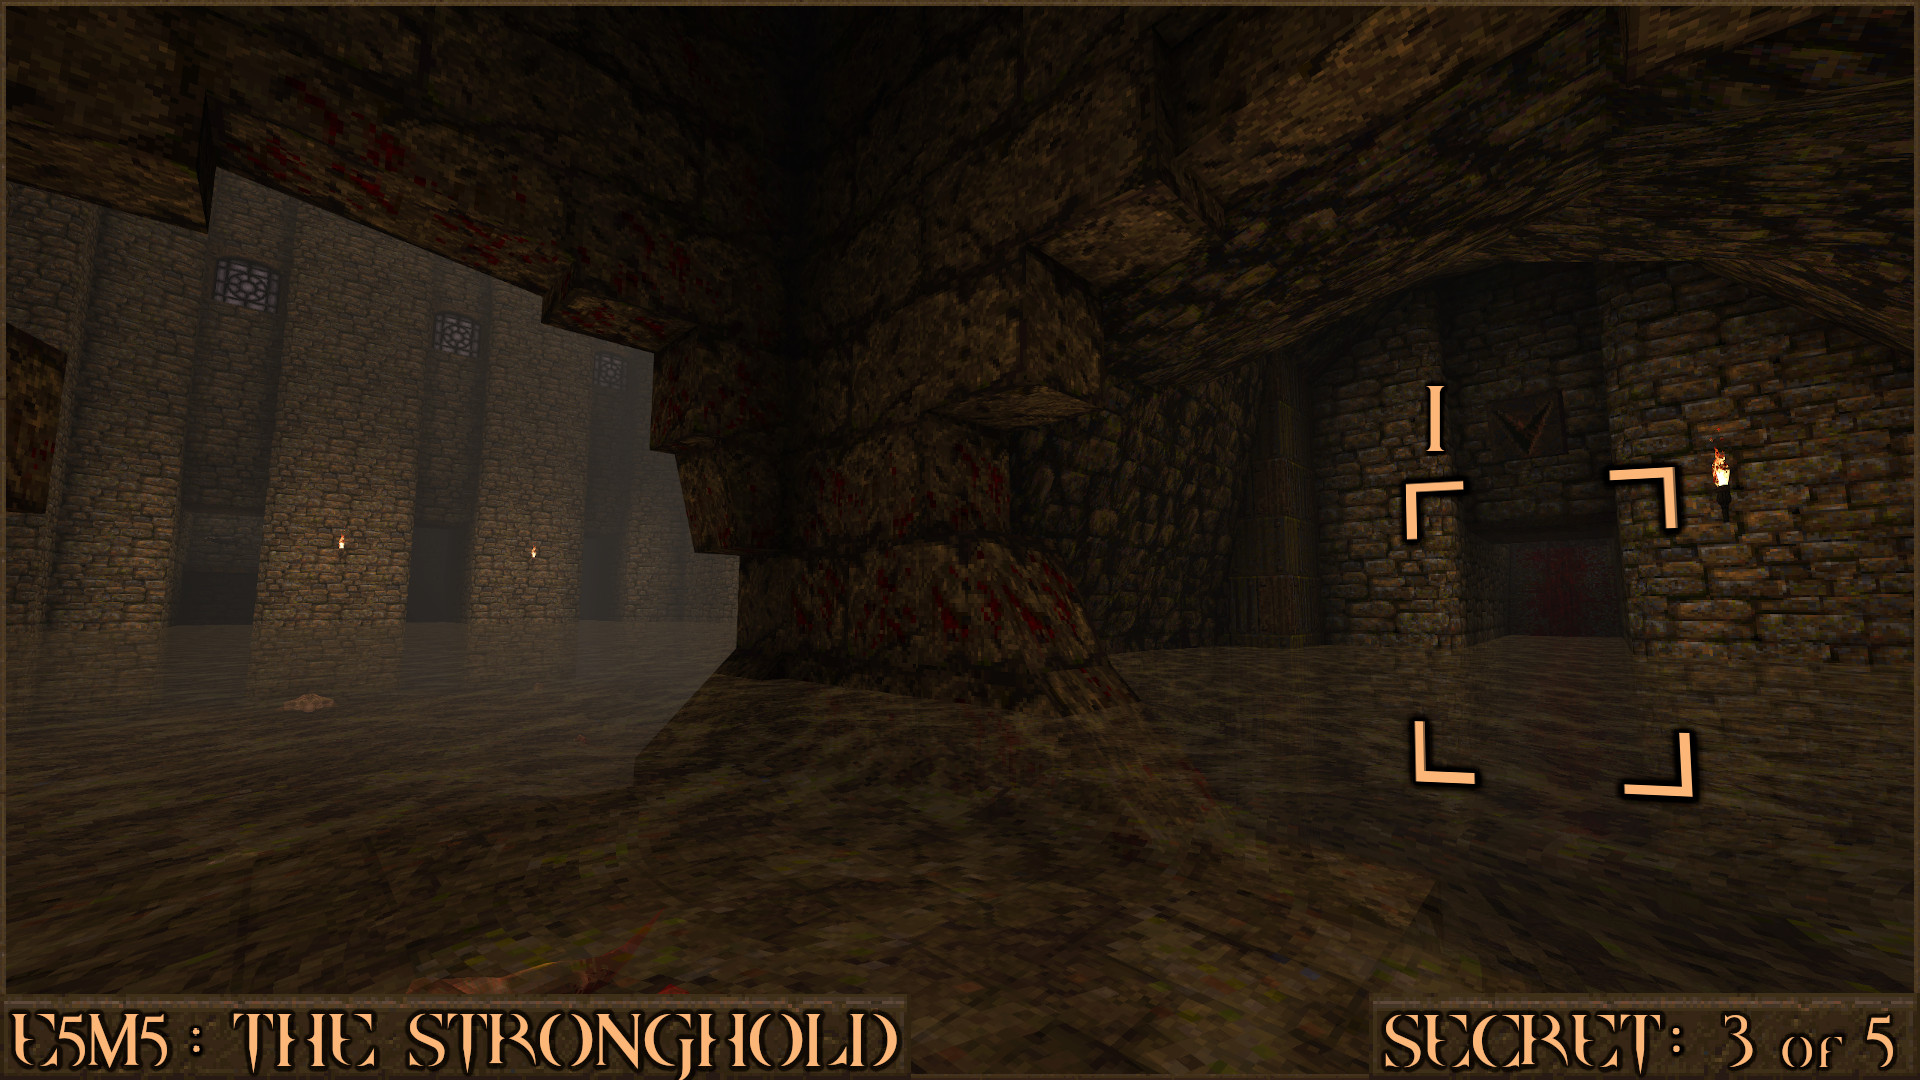 Quake Finding All Secrets in Quake Expansion pack: Dimension of the Past - E5M5: The Stronghold - 9EC6B64